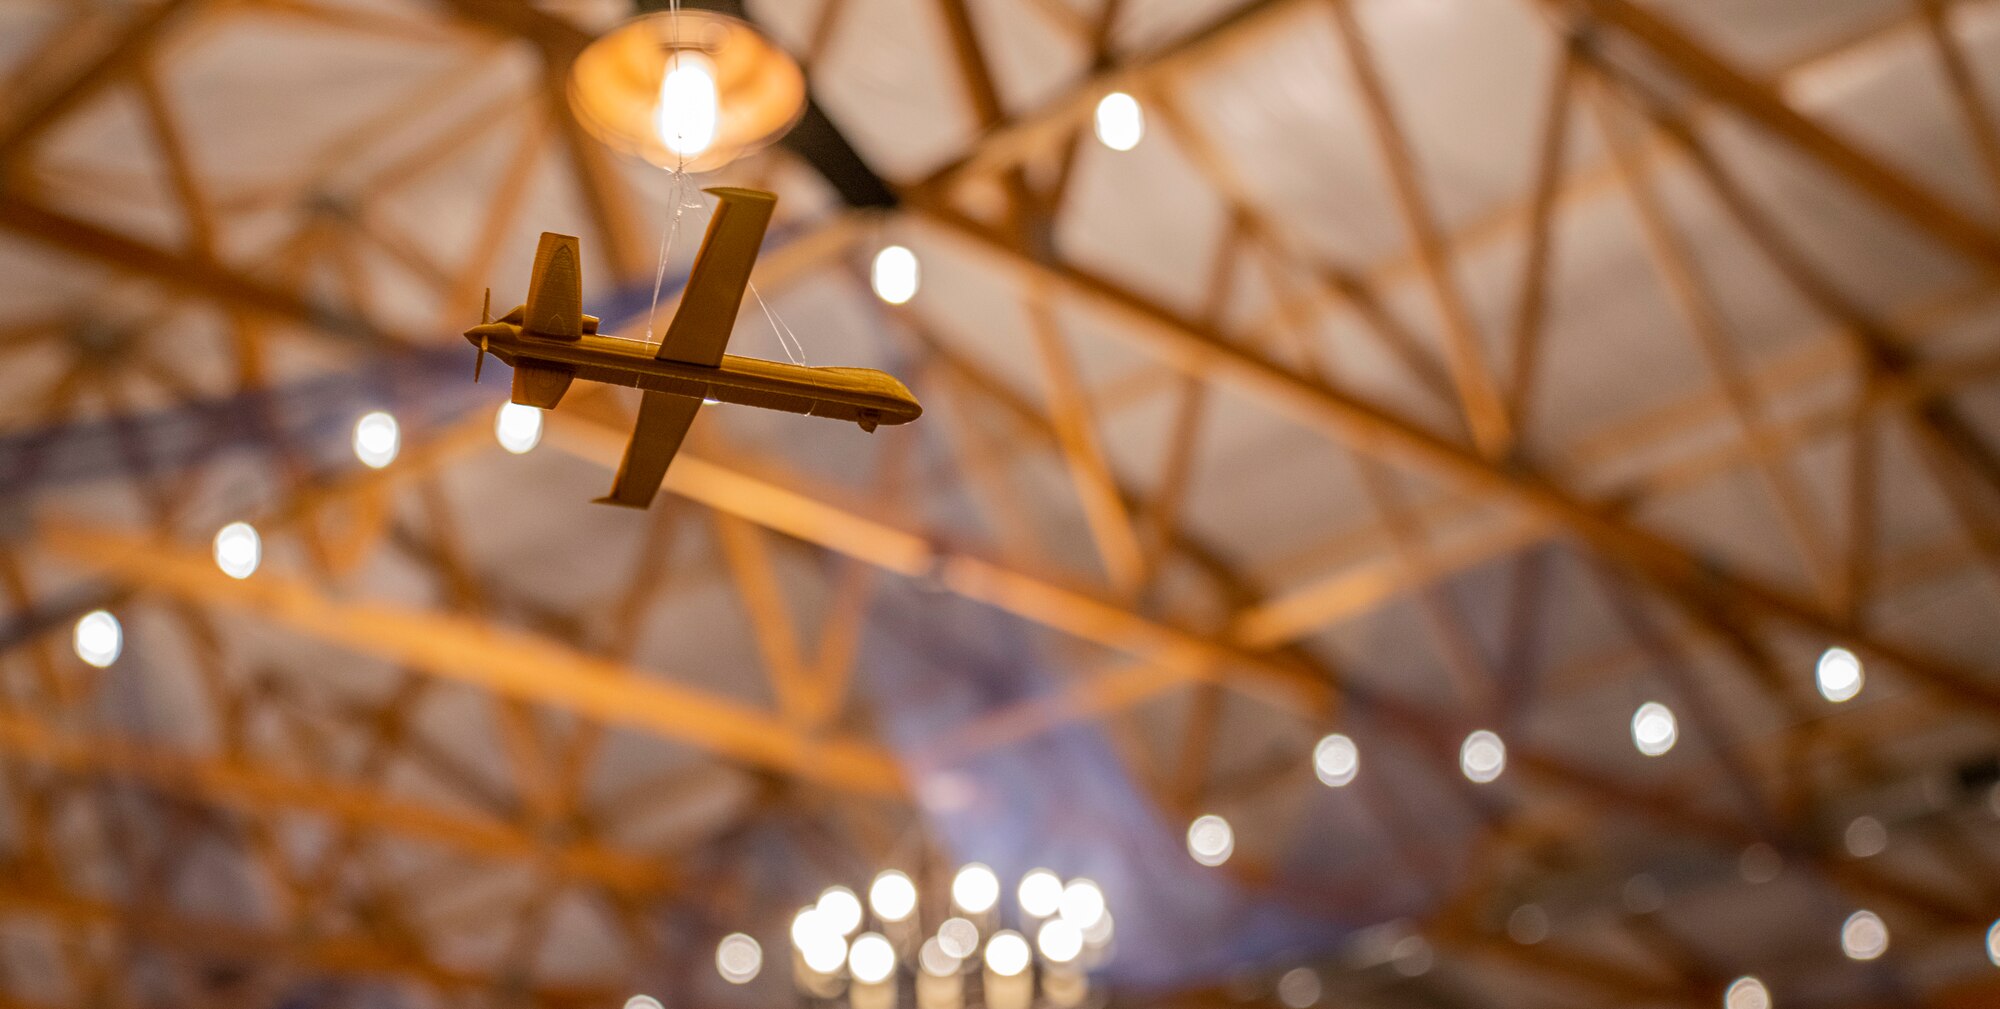 A small, wooden MQ-9 Reaper figurine hangs on a string with white holiday lights and wooden ceiling structures in the background.